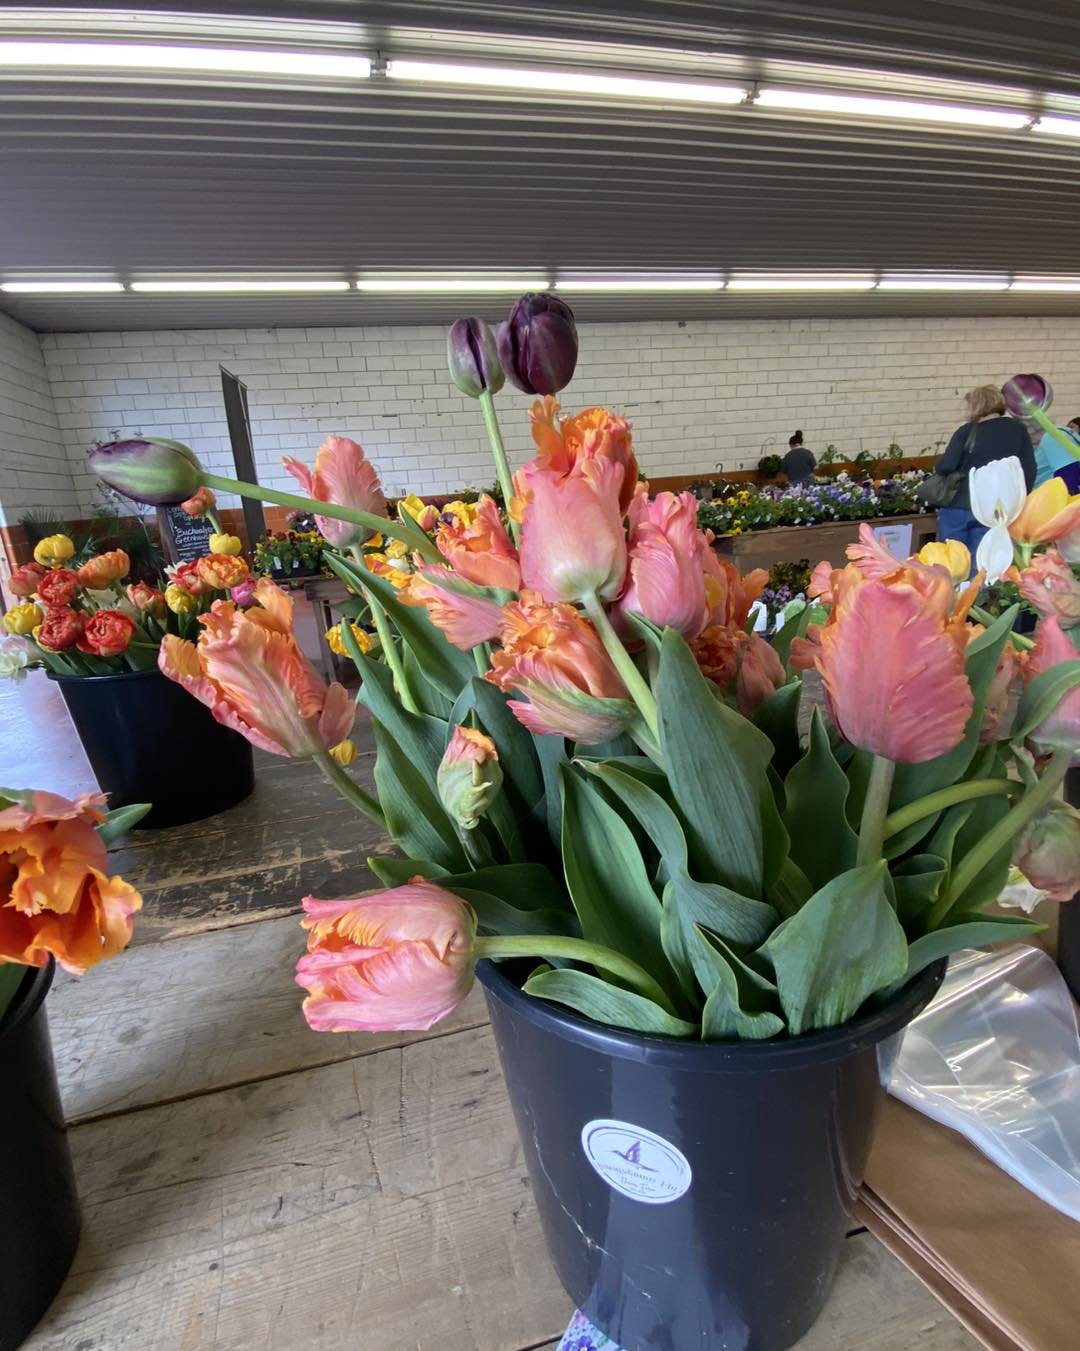 Come check out our fresh cut bouquets at the Plant Sale in the Kistler Building at the Wayne County Home &amp; Garden Show.  We have fancy tulips and amazingly fragrant narcissus. 

Come check out our herbs and perennials too! 

#waynecountyhomeandga